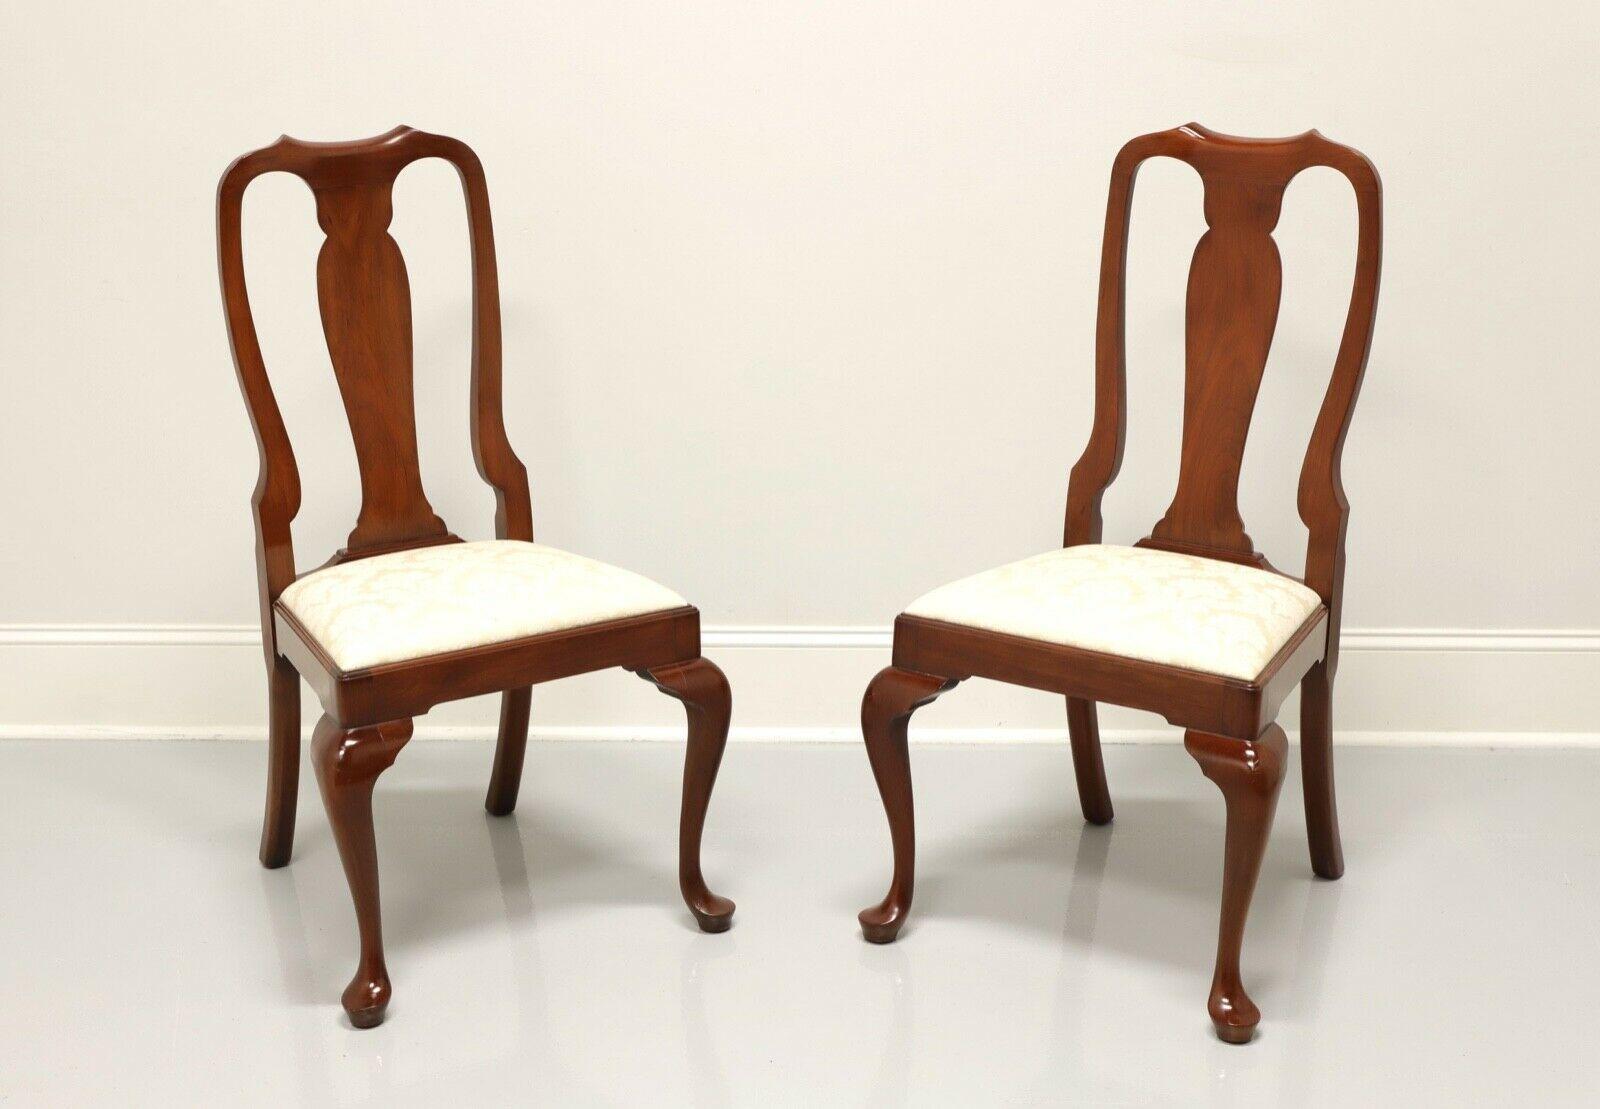 HENKEL HARRIS 105S 24 Solid Cherry Queen Anne Dining Side Chairs - Pair A 5